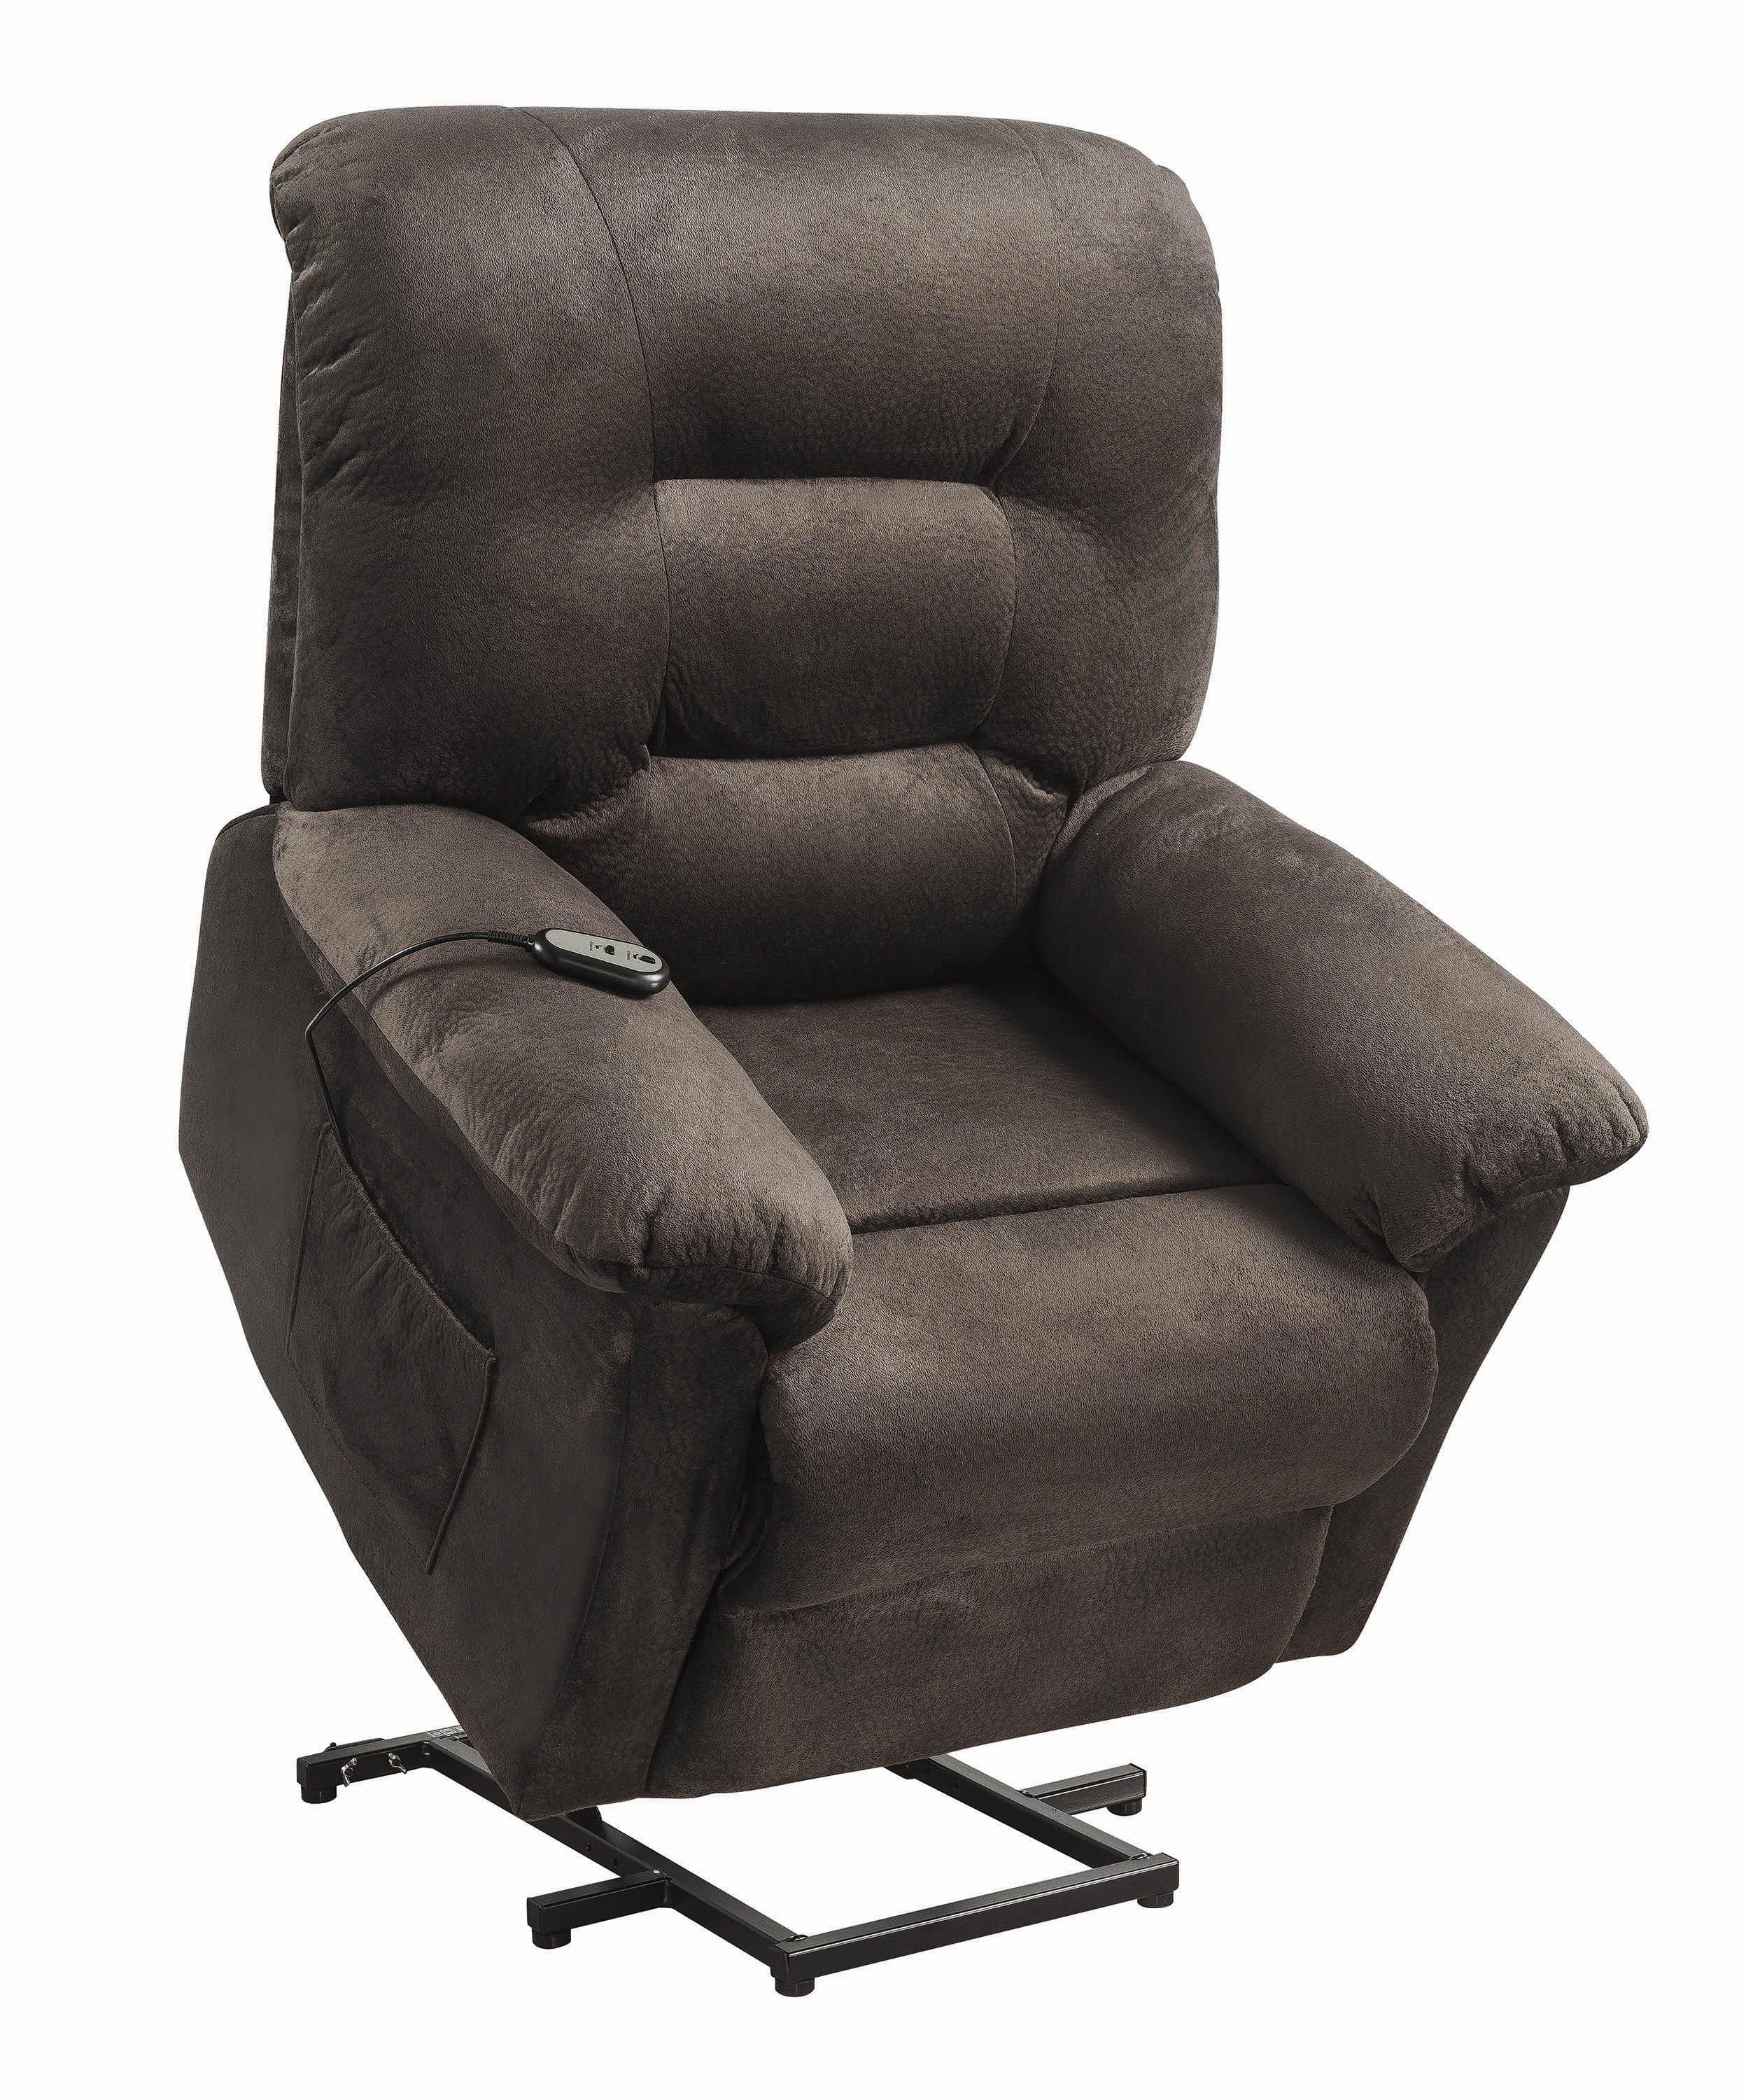 

    
Contemporary Black Leather Upholstery Power lift recliner by Coaster
